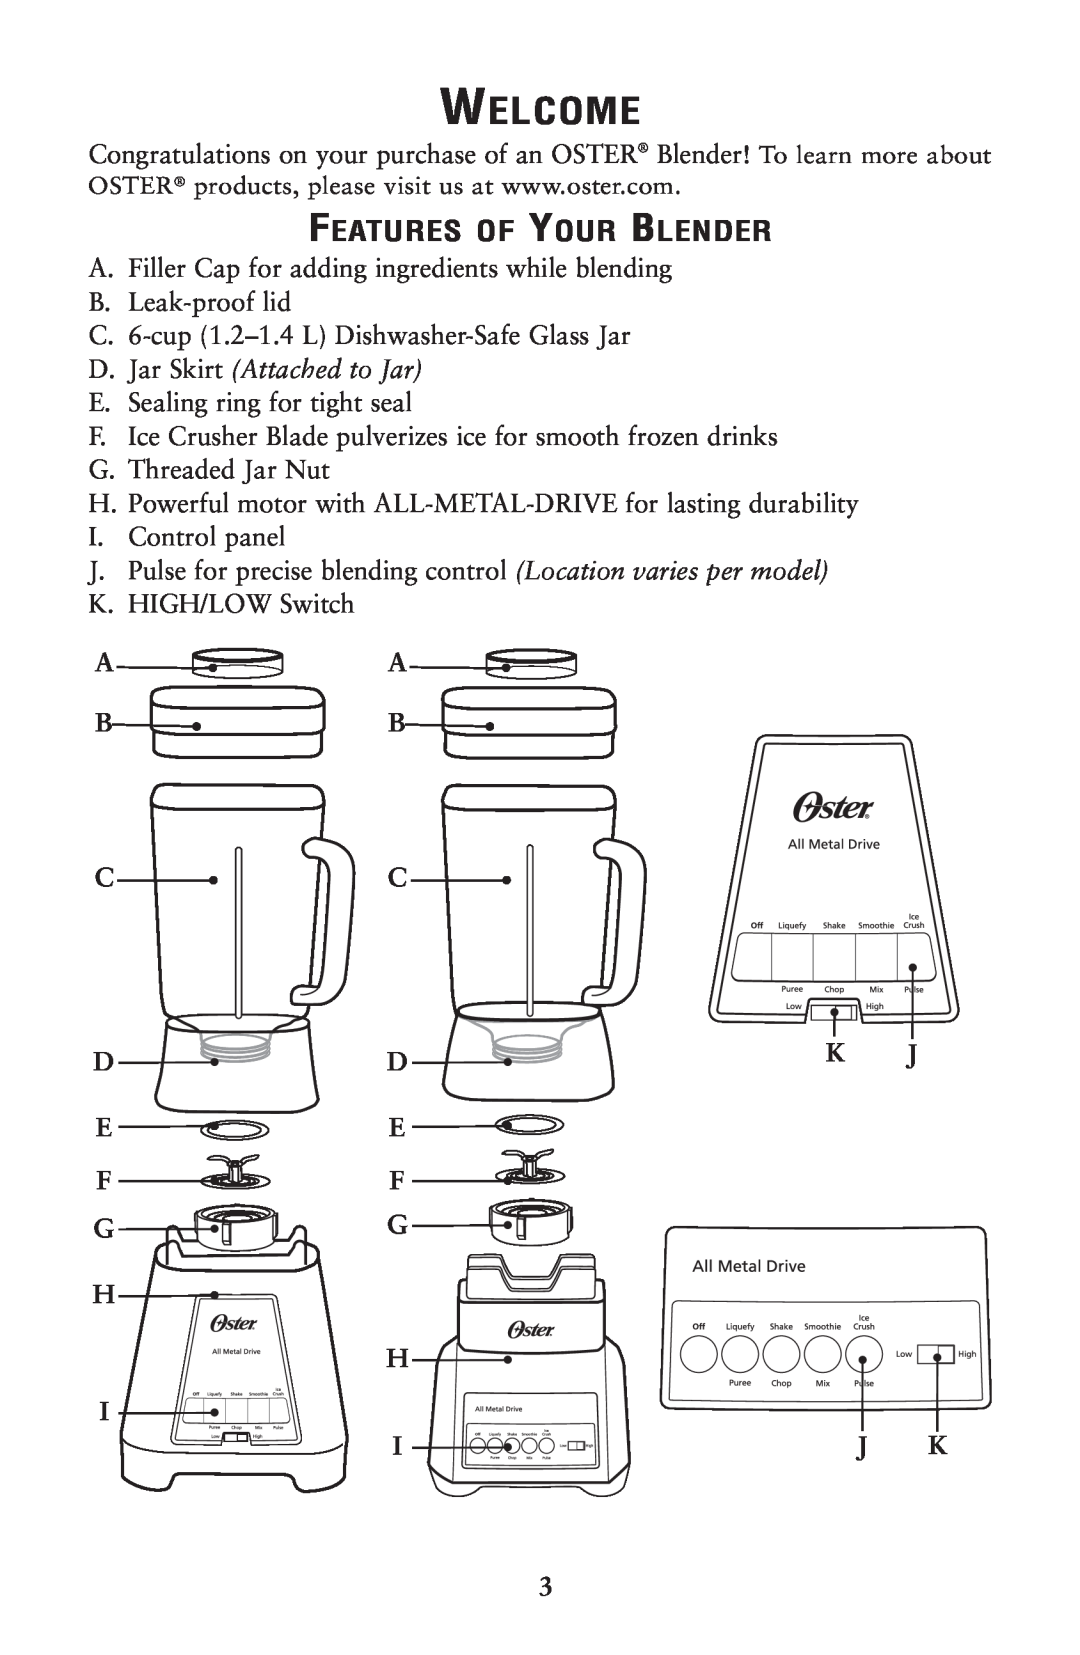 Oster 133086 user manual Welcome, D.Jar Skirt Attached to Jar, Features Of Your Blender 